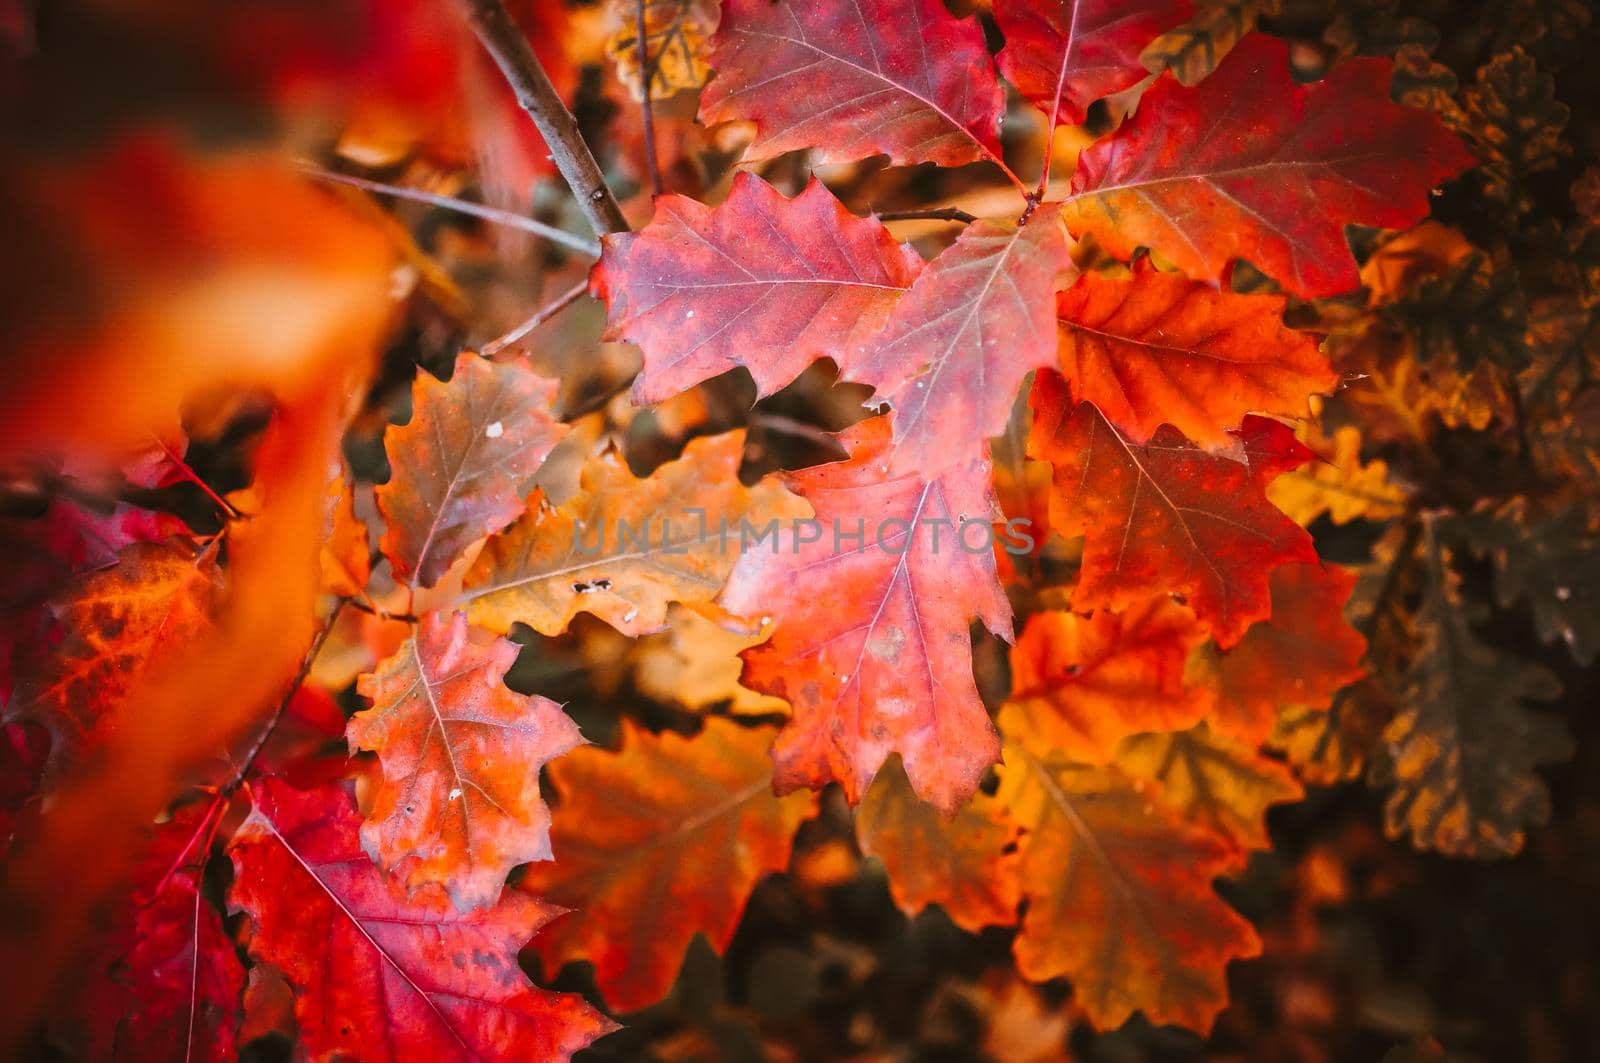 Autumn landscape background. Red autumn oak leaves in a young forest early in the morning at sunrise. Fallen Leaf Season Concept